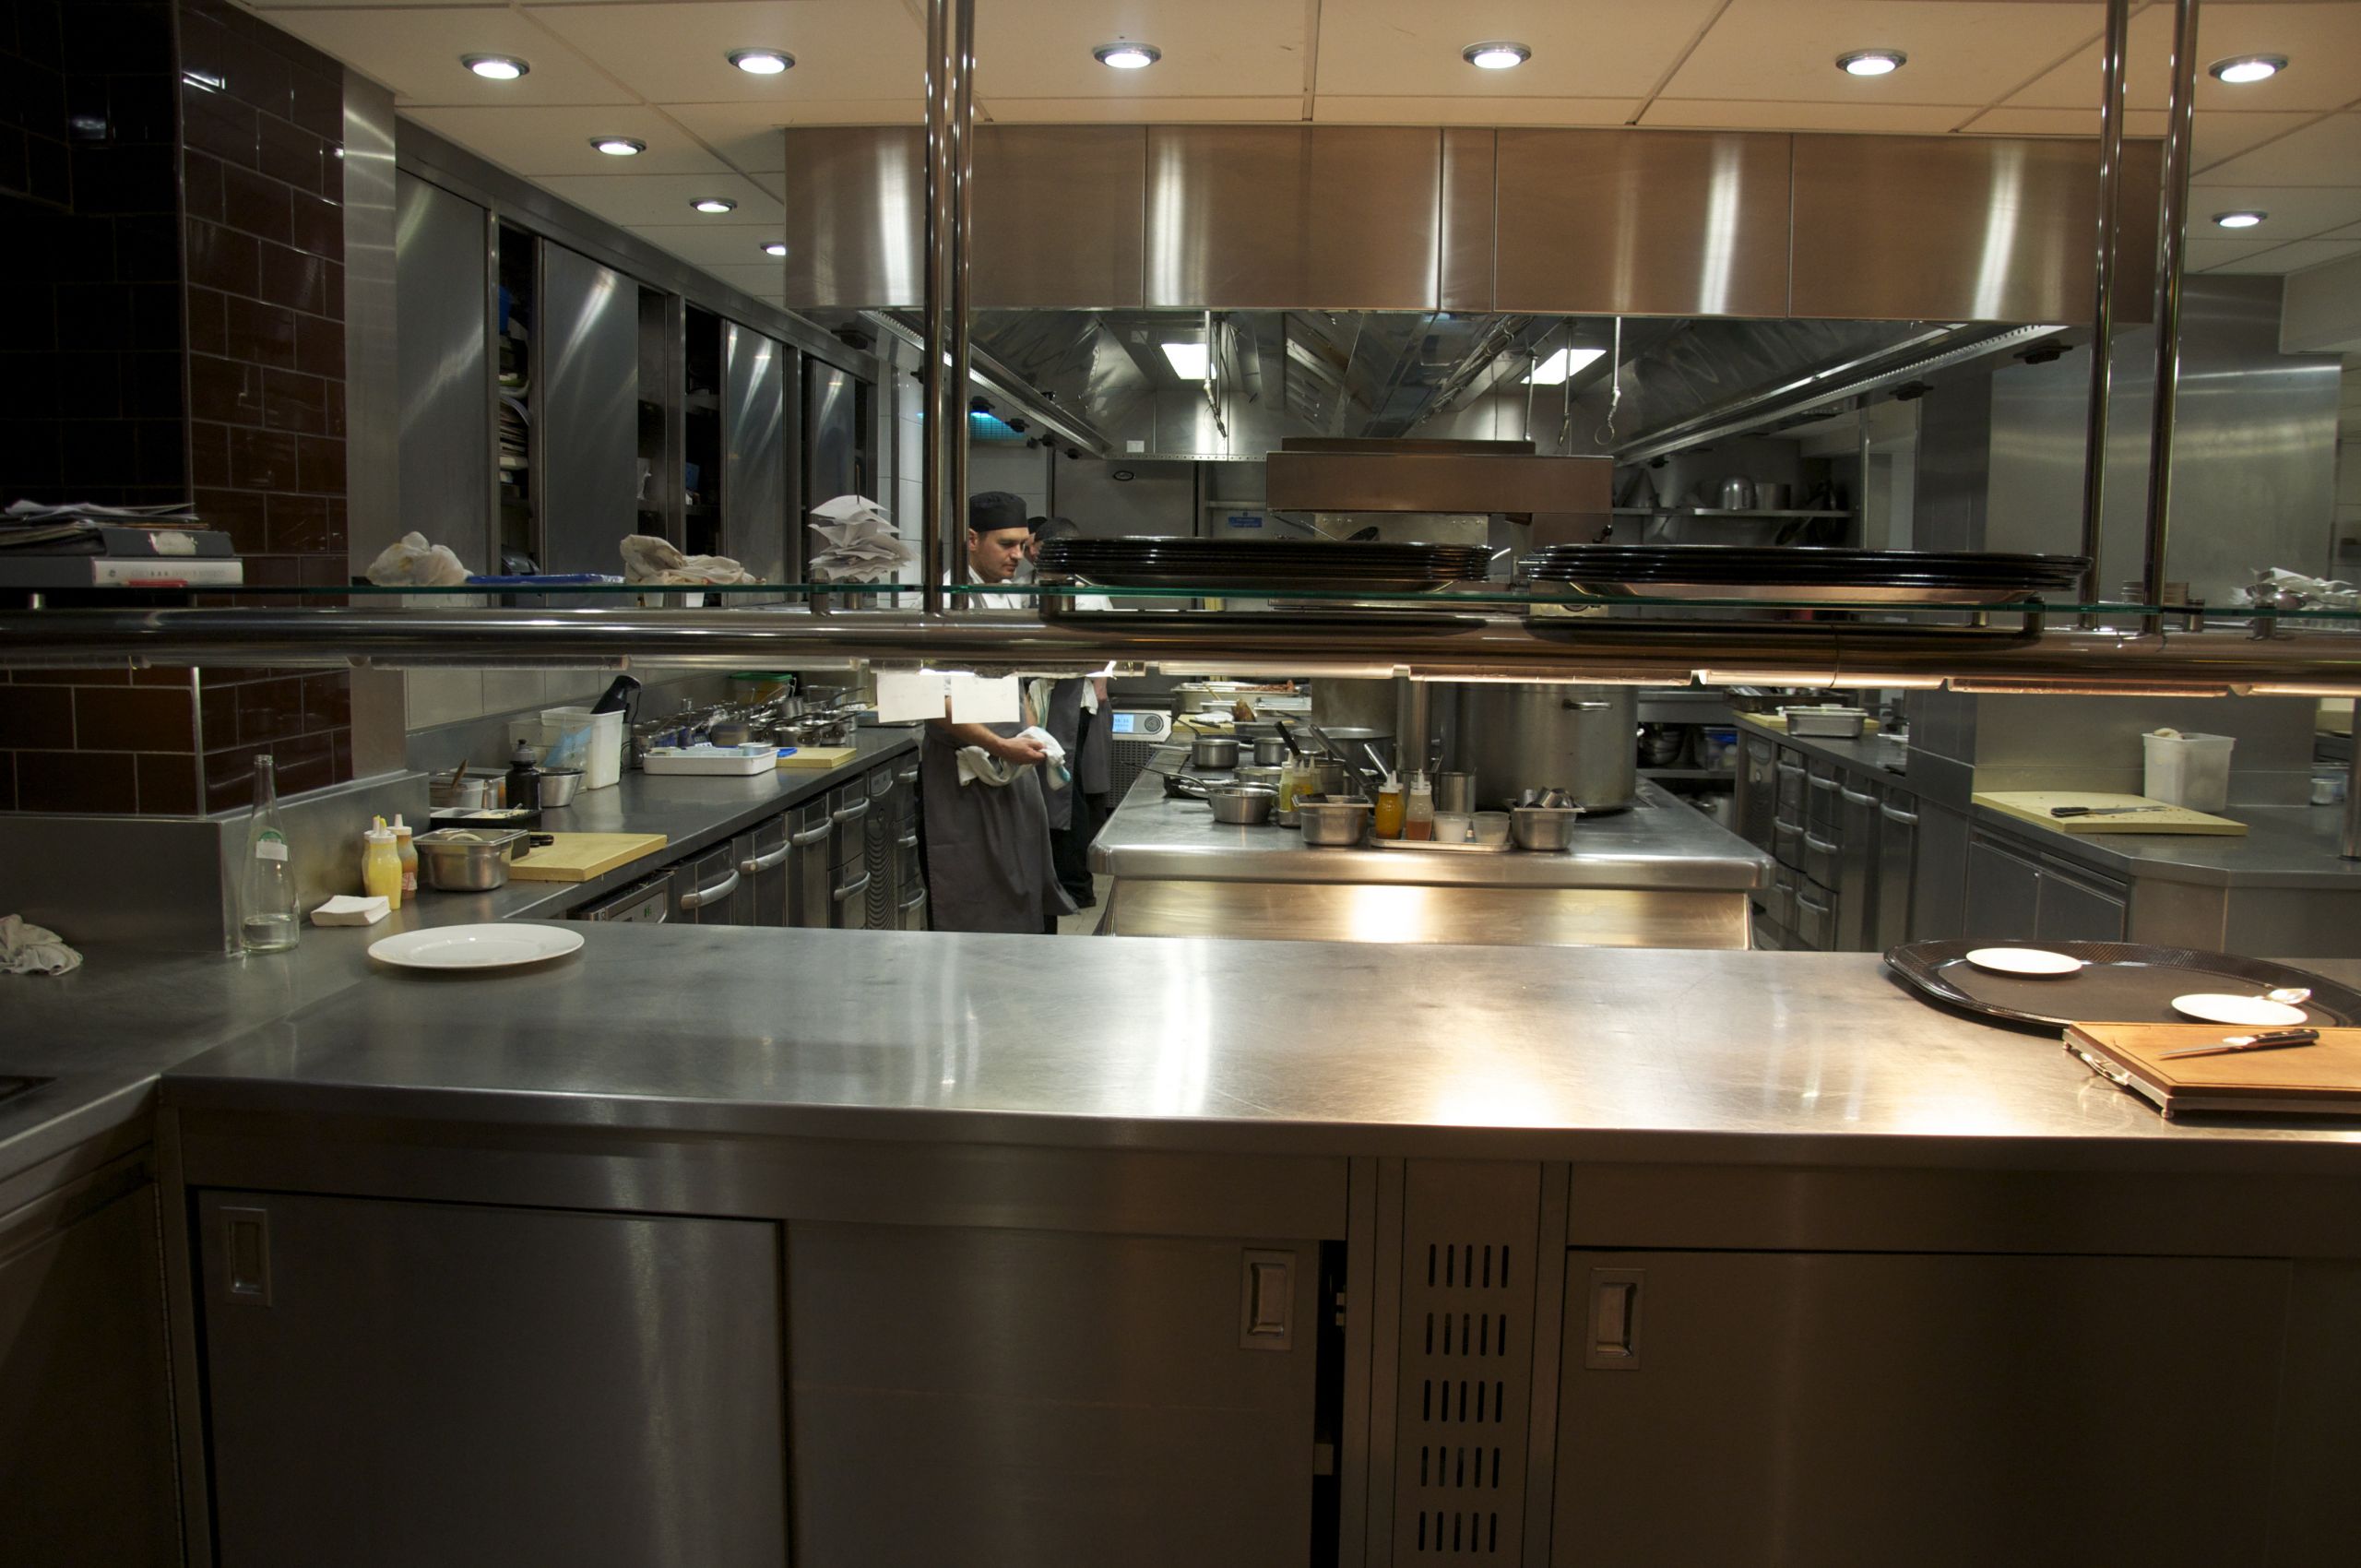 Commercial Kitchen Lighting Lovely Effective Restaurant Kitchen Design Of Commercial Kitchen Lighting Scaled 